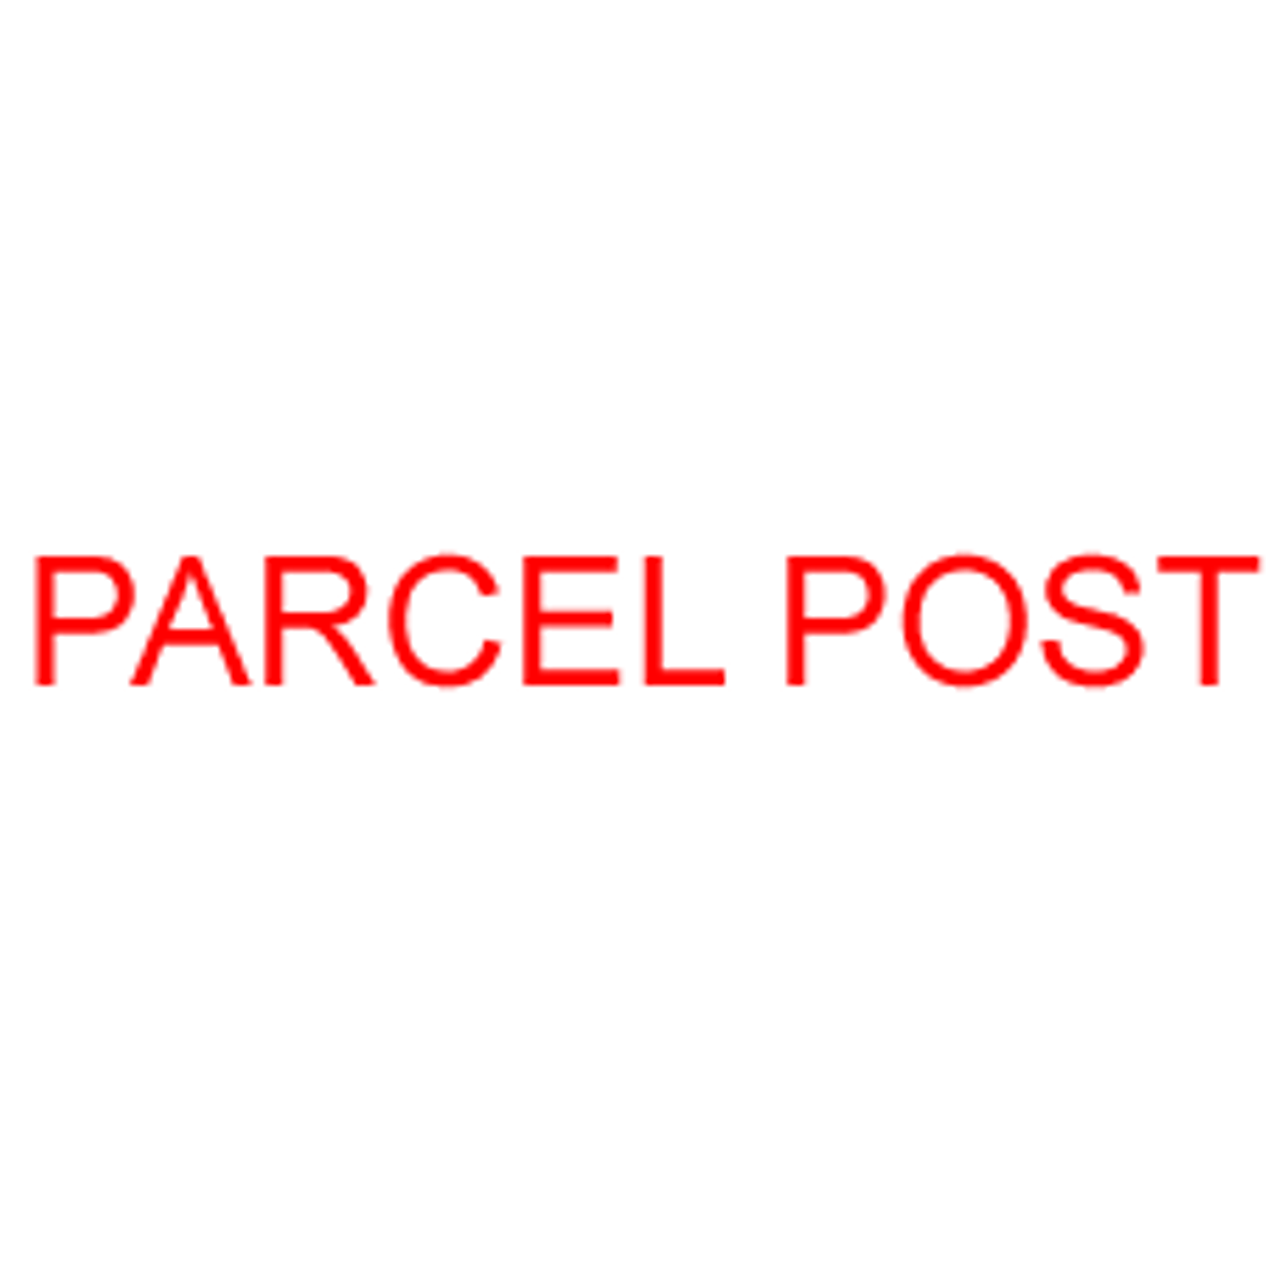 PARCEL POST Rubber Stamp for mail use self-inking